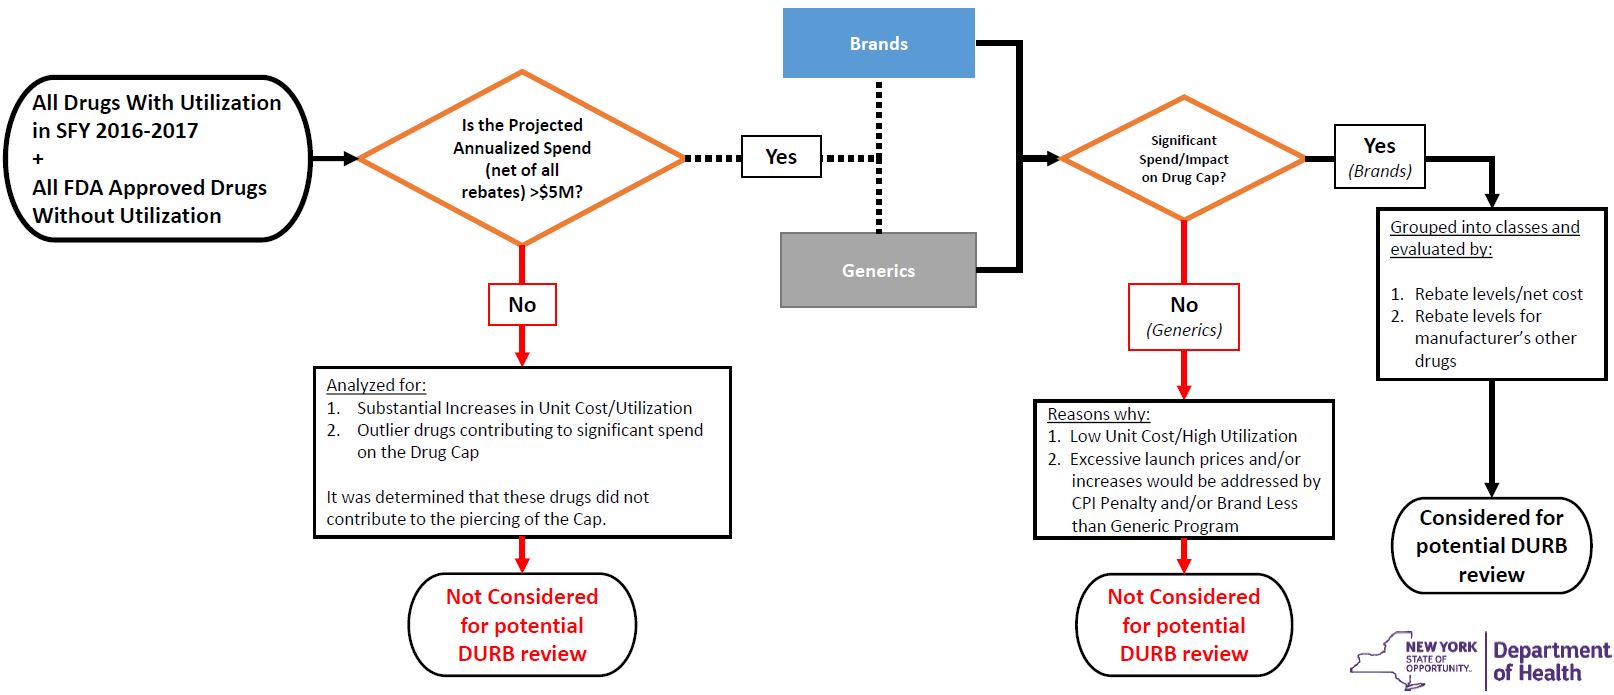 Process for Initial Identification of Drugs for Possible DURB Referral (Visual Flowchart)